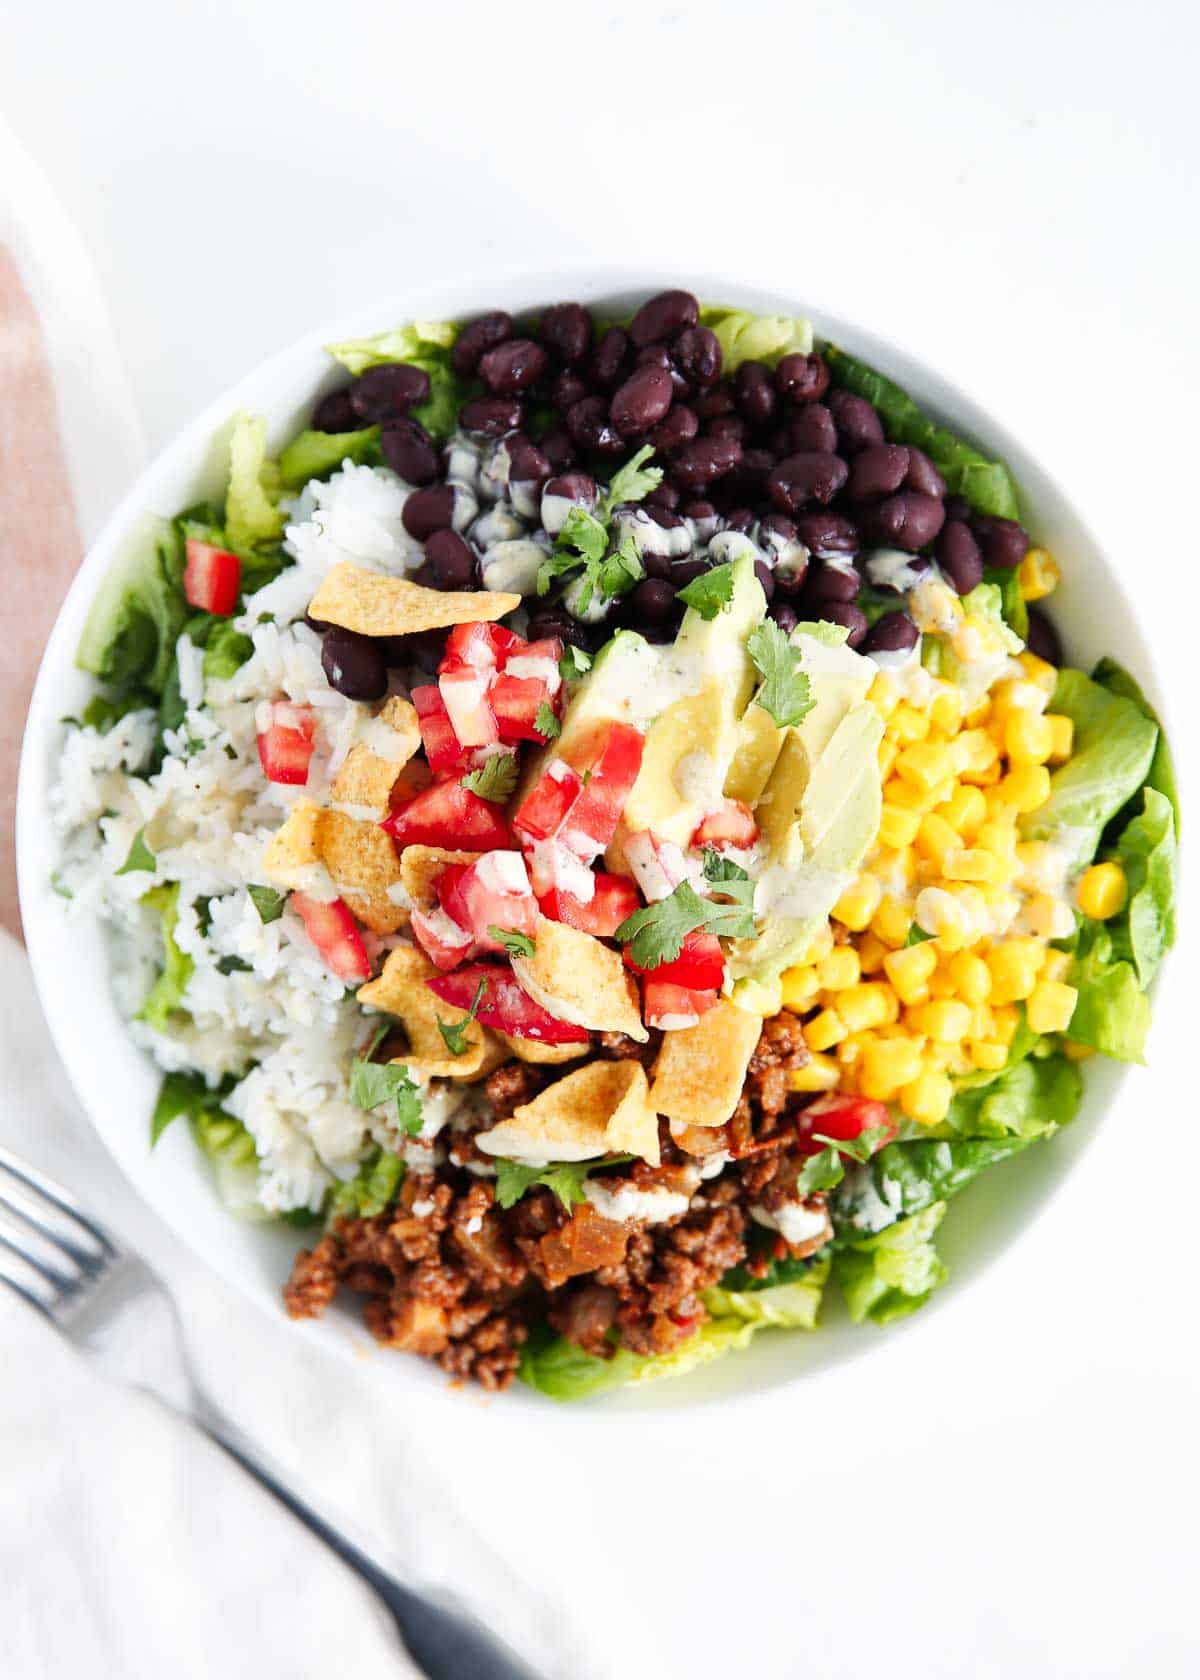 Taco salad in a white bowl.